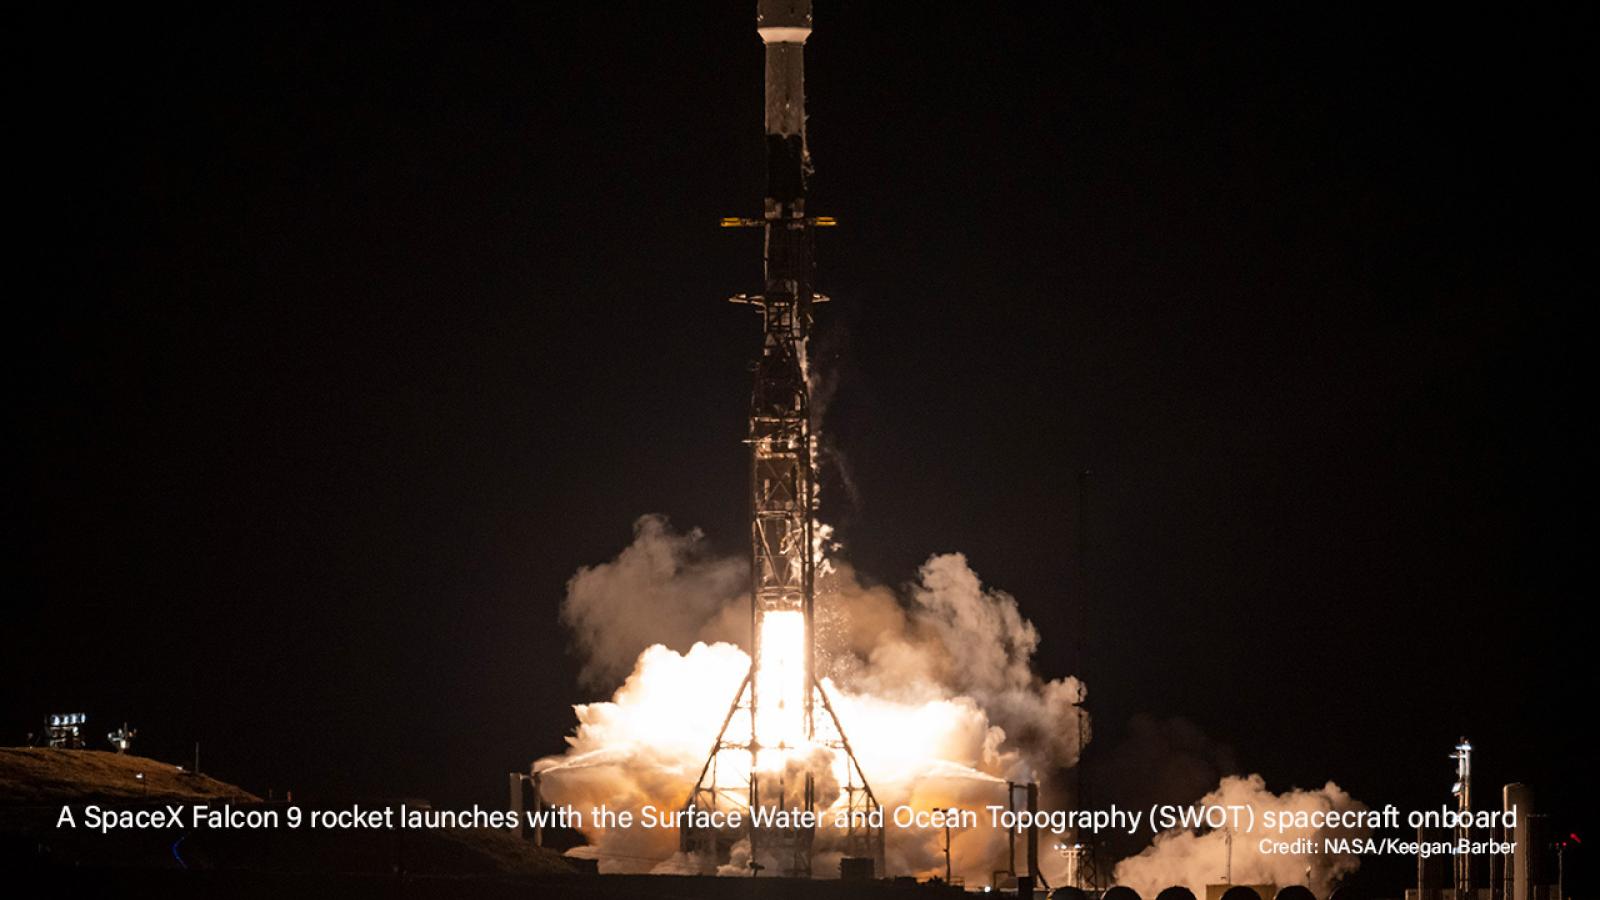 A SpaceX Falcon 9 rocket on the platform being launched in the dark with smoke and fire coming out from beneath it